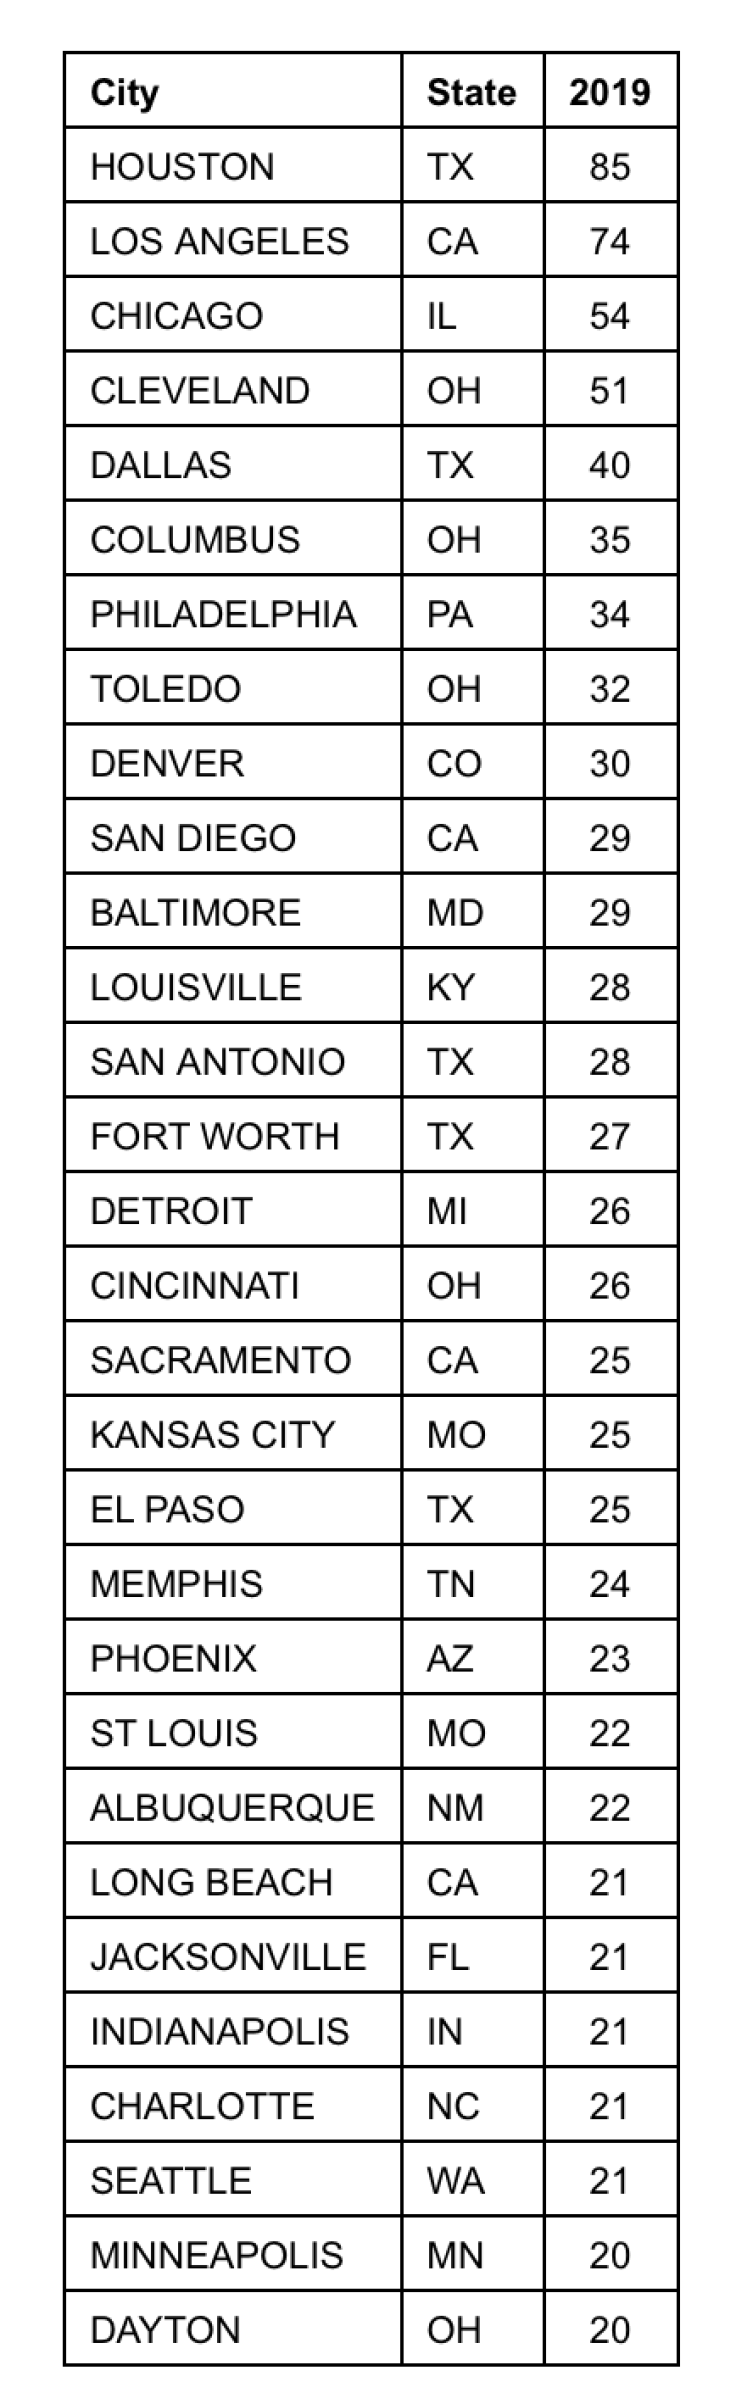 2019 Dog Attack Rankings by City